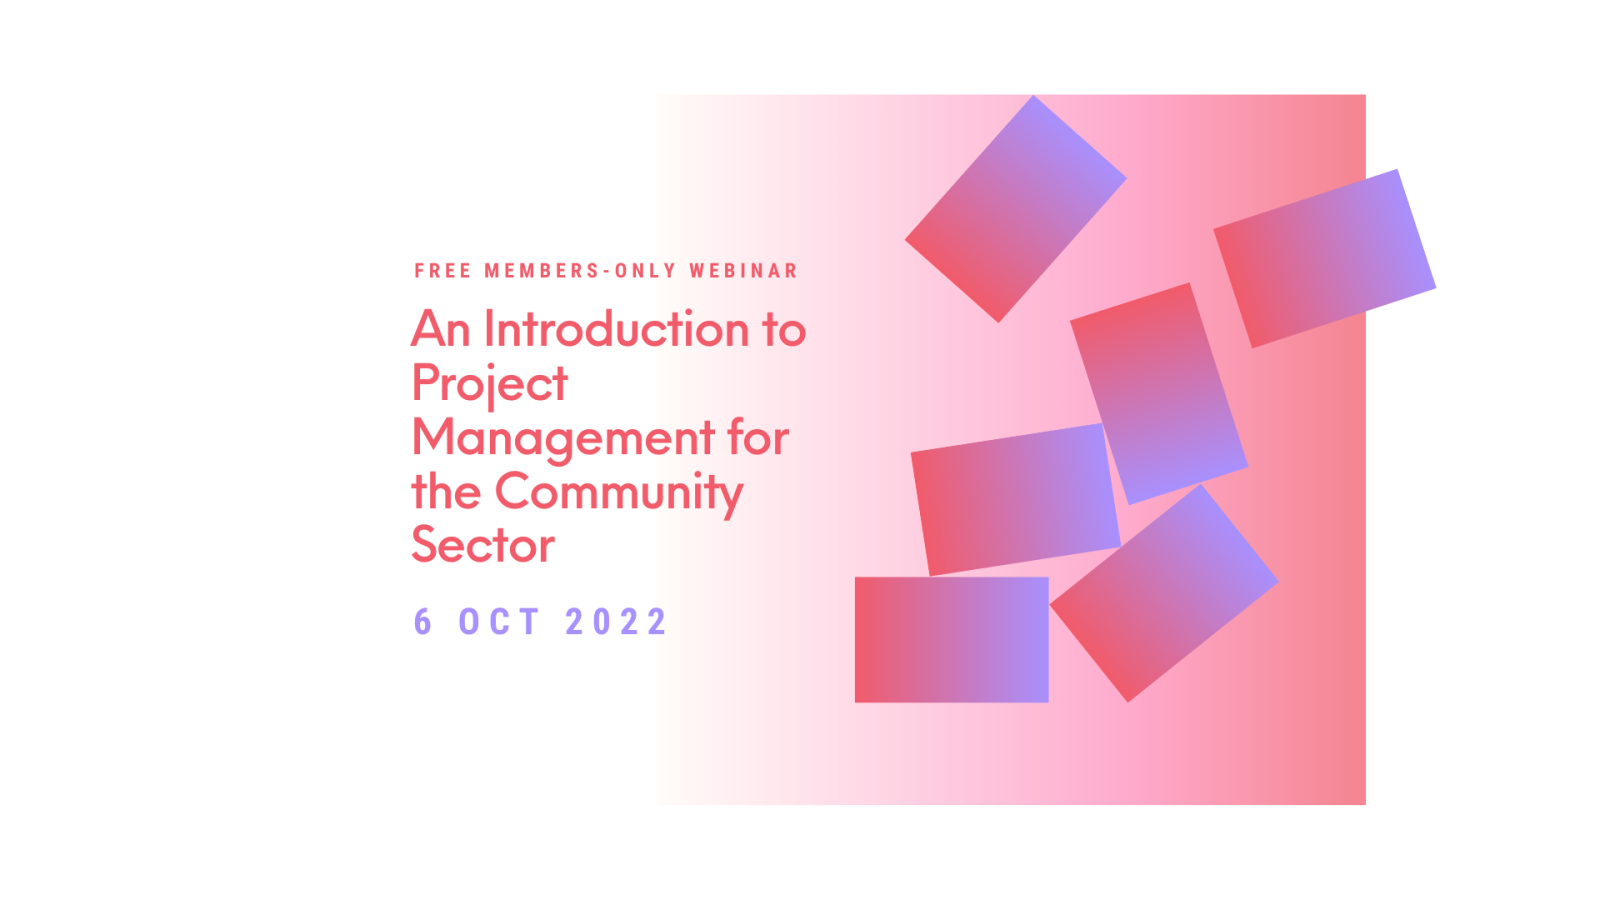 An Introduction to Project Management for the Community Sector